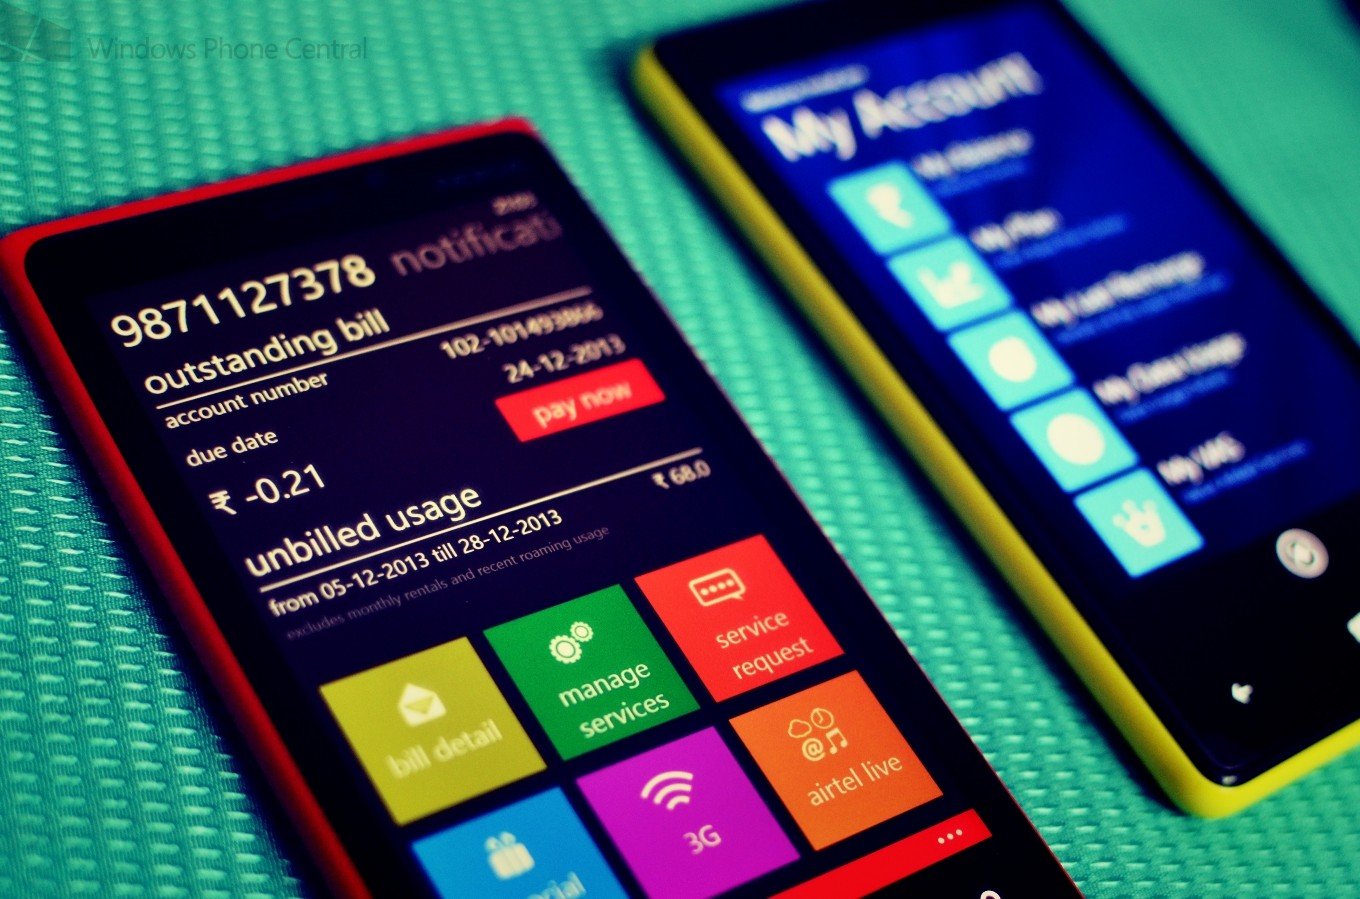 Official telco apps for Windows Phone in India